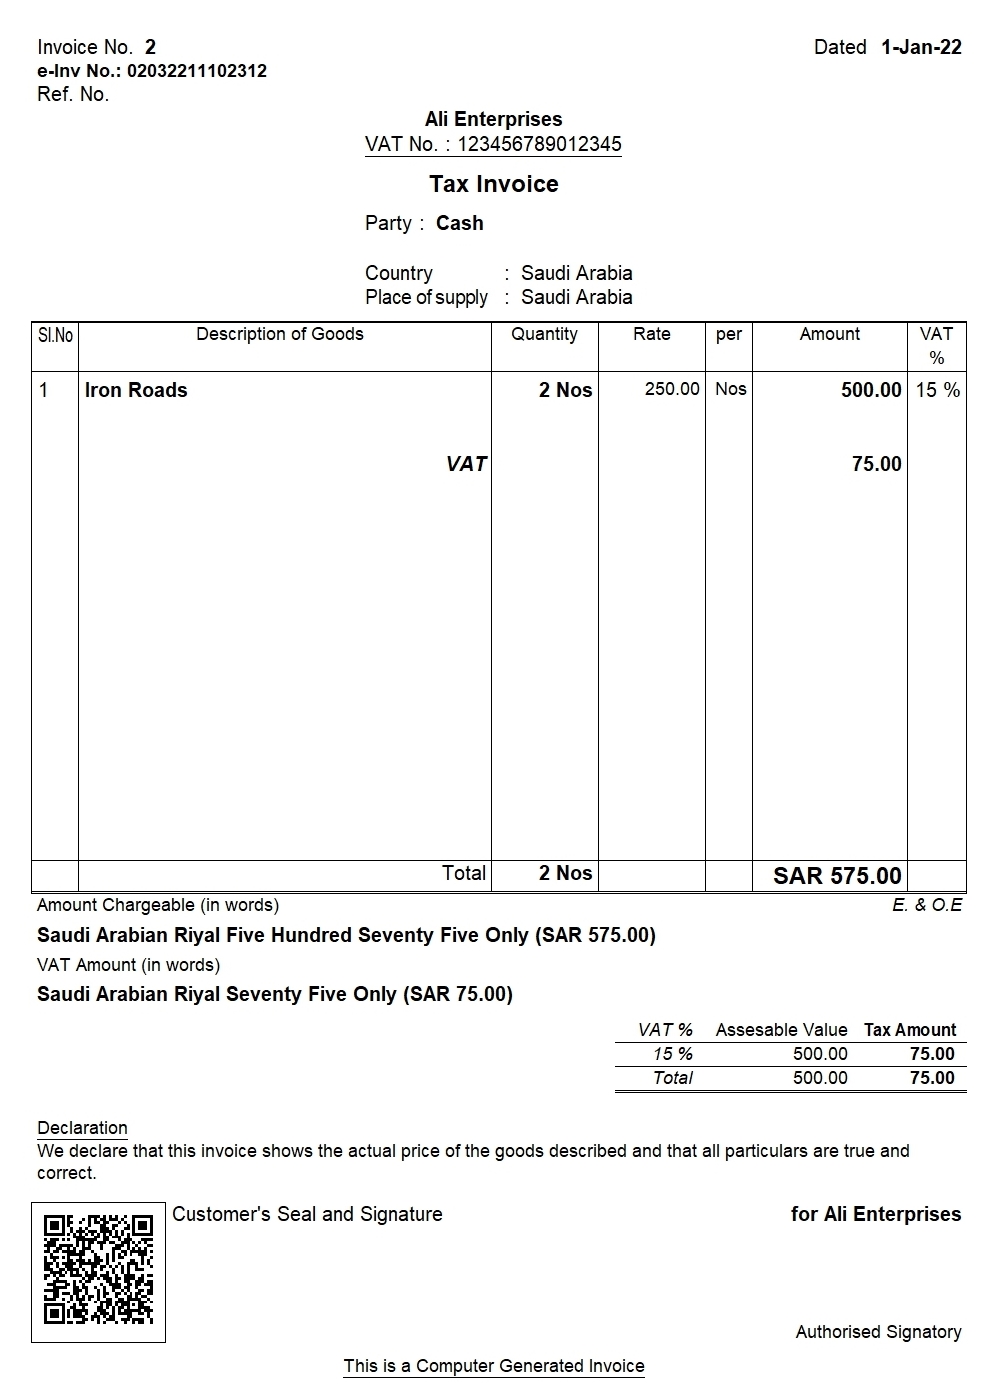 Simplified Tax E-invoice format